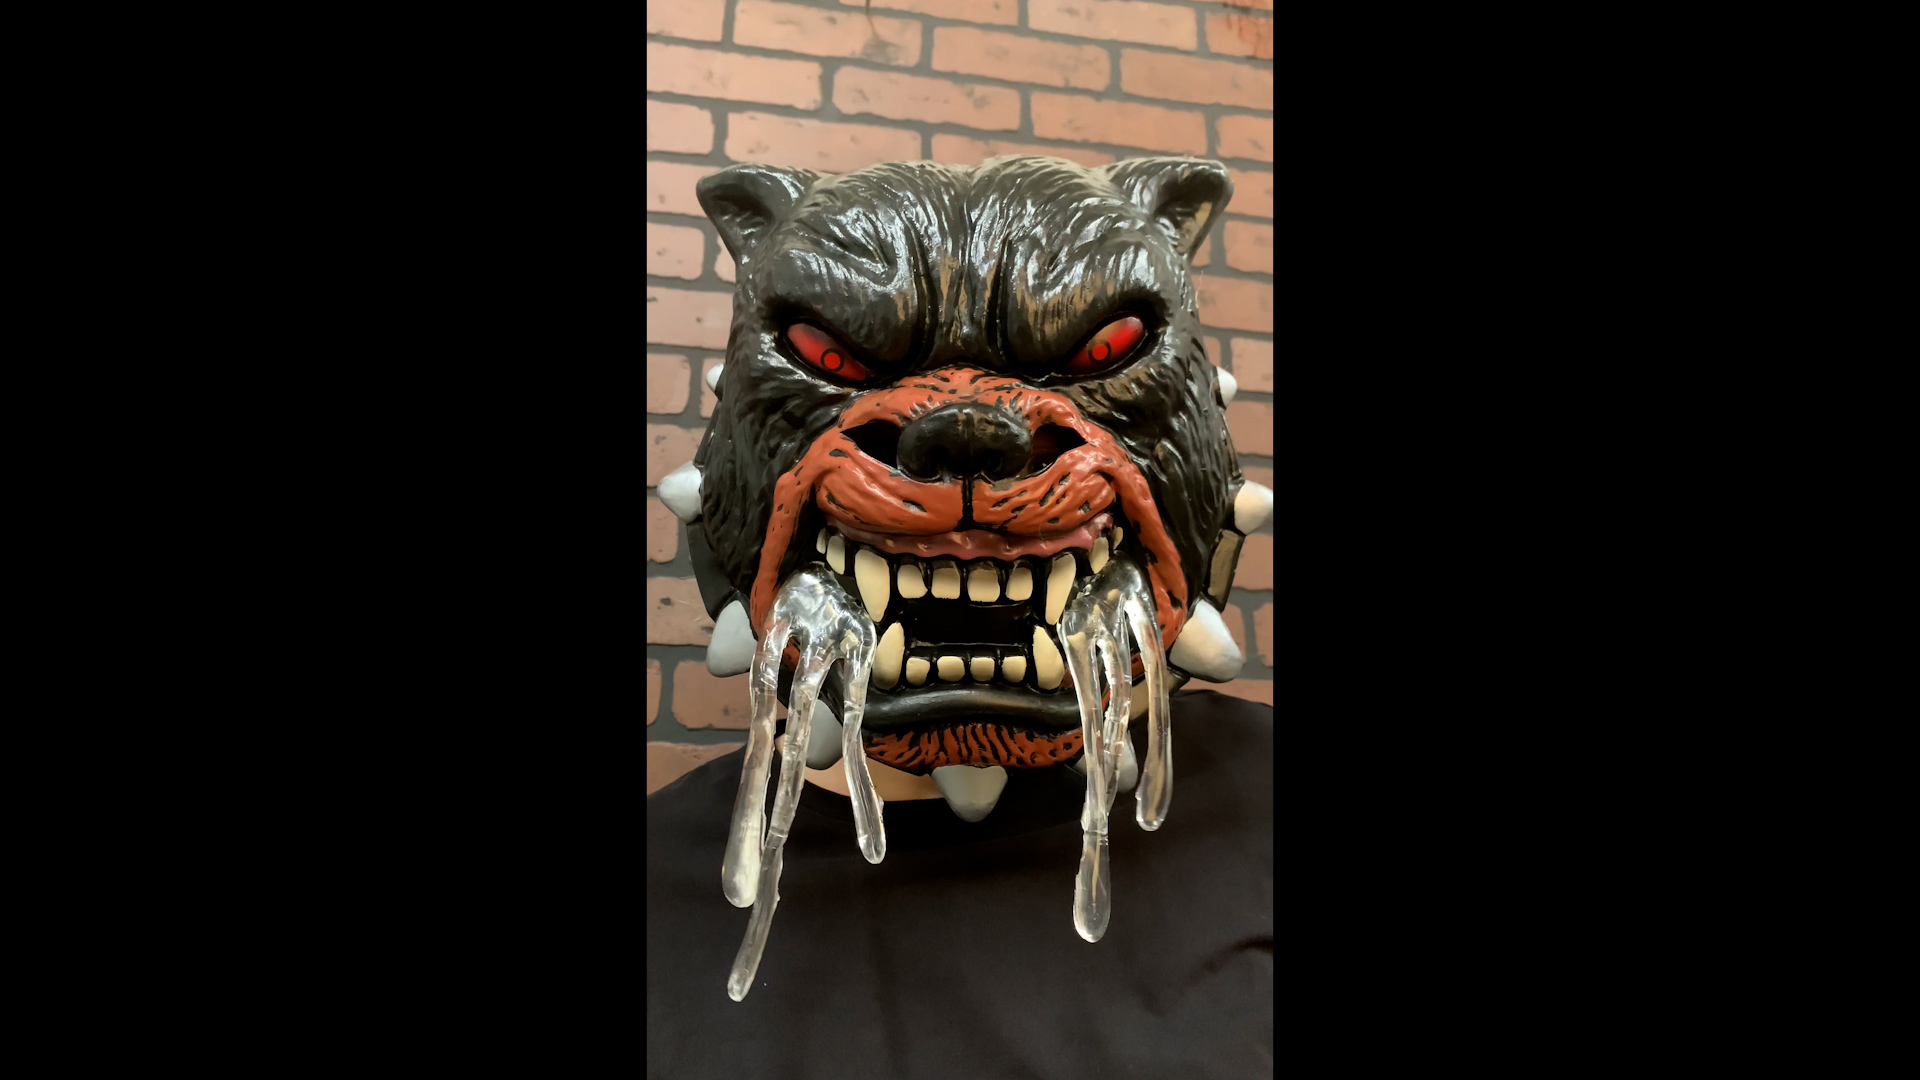 Does your kid ever remind you of a rabid dog? This Kid's Monster Dog Costume is perfect for you. It'll scare everyone and you shouldn't have to pick up any droppings.